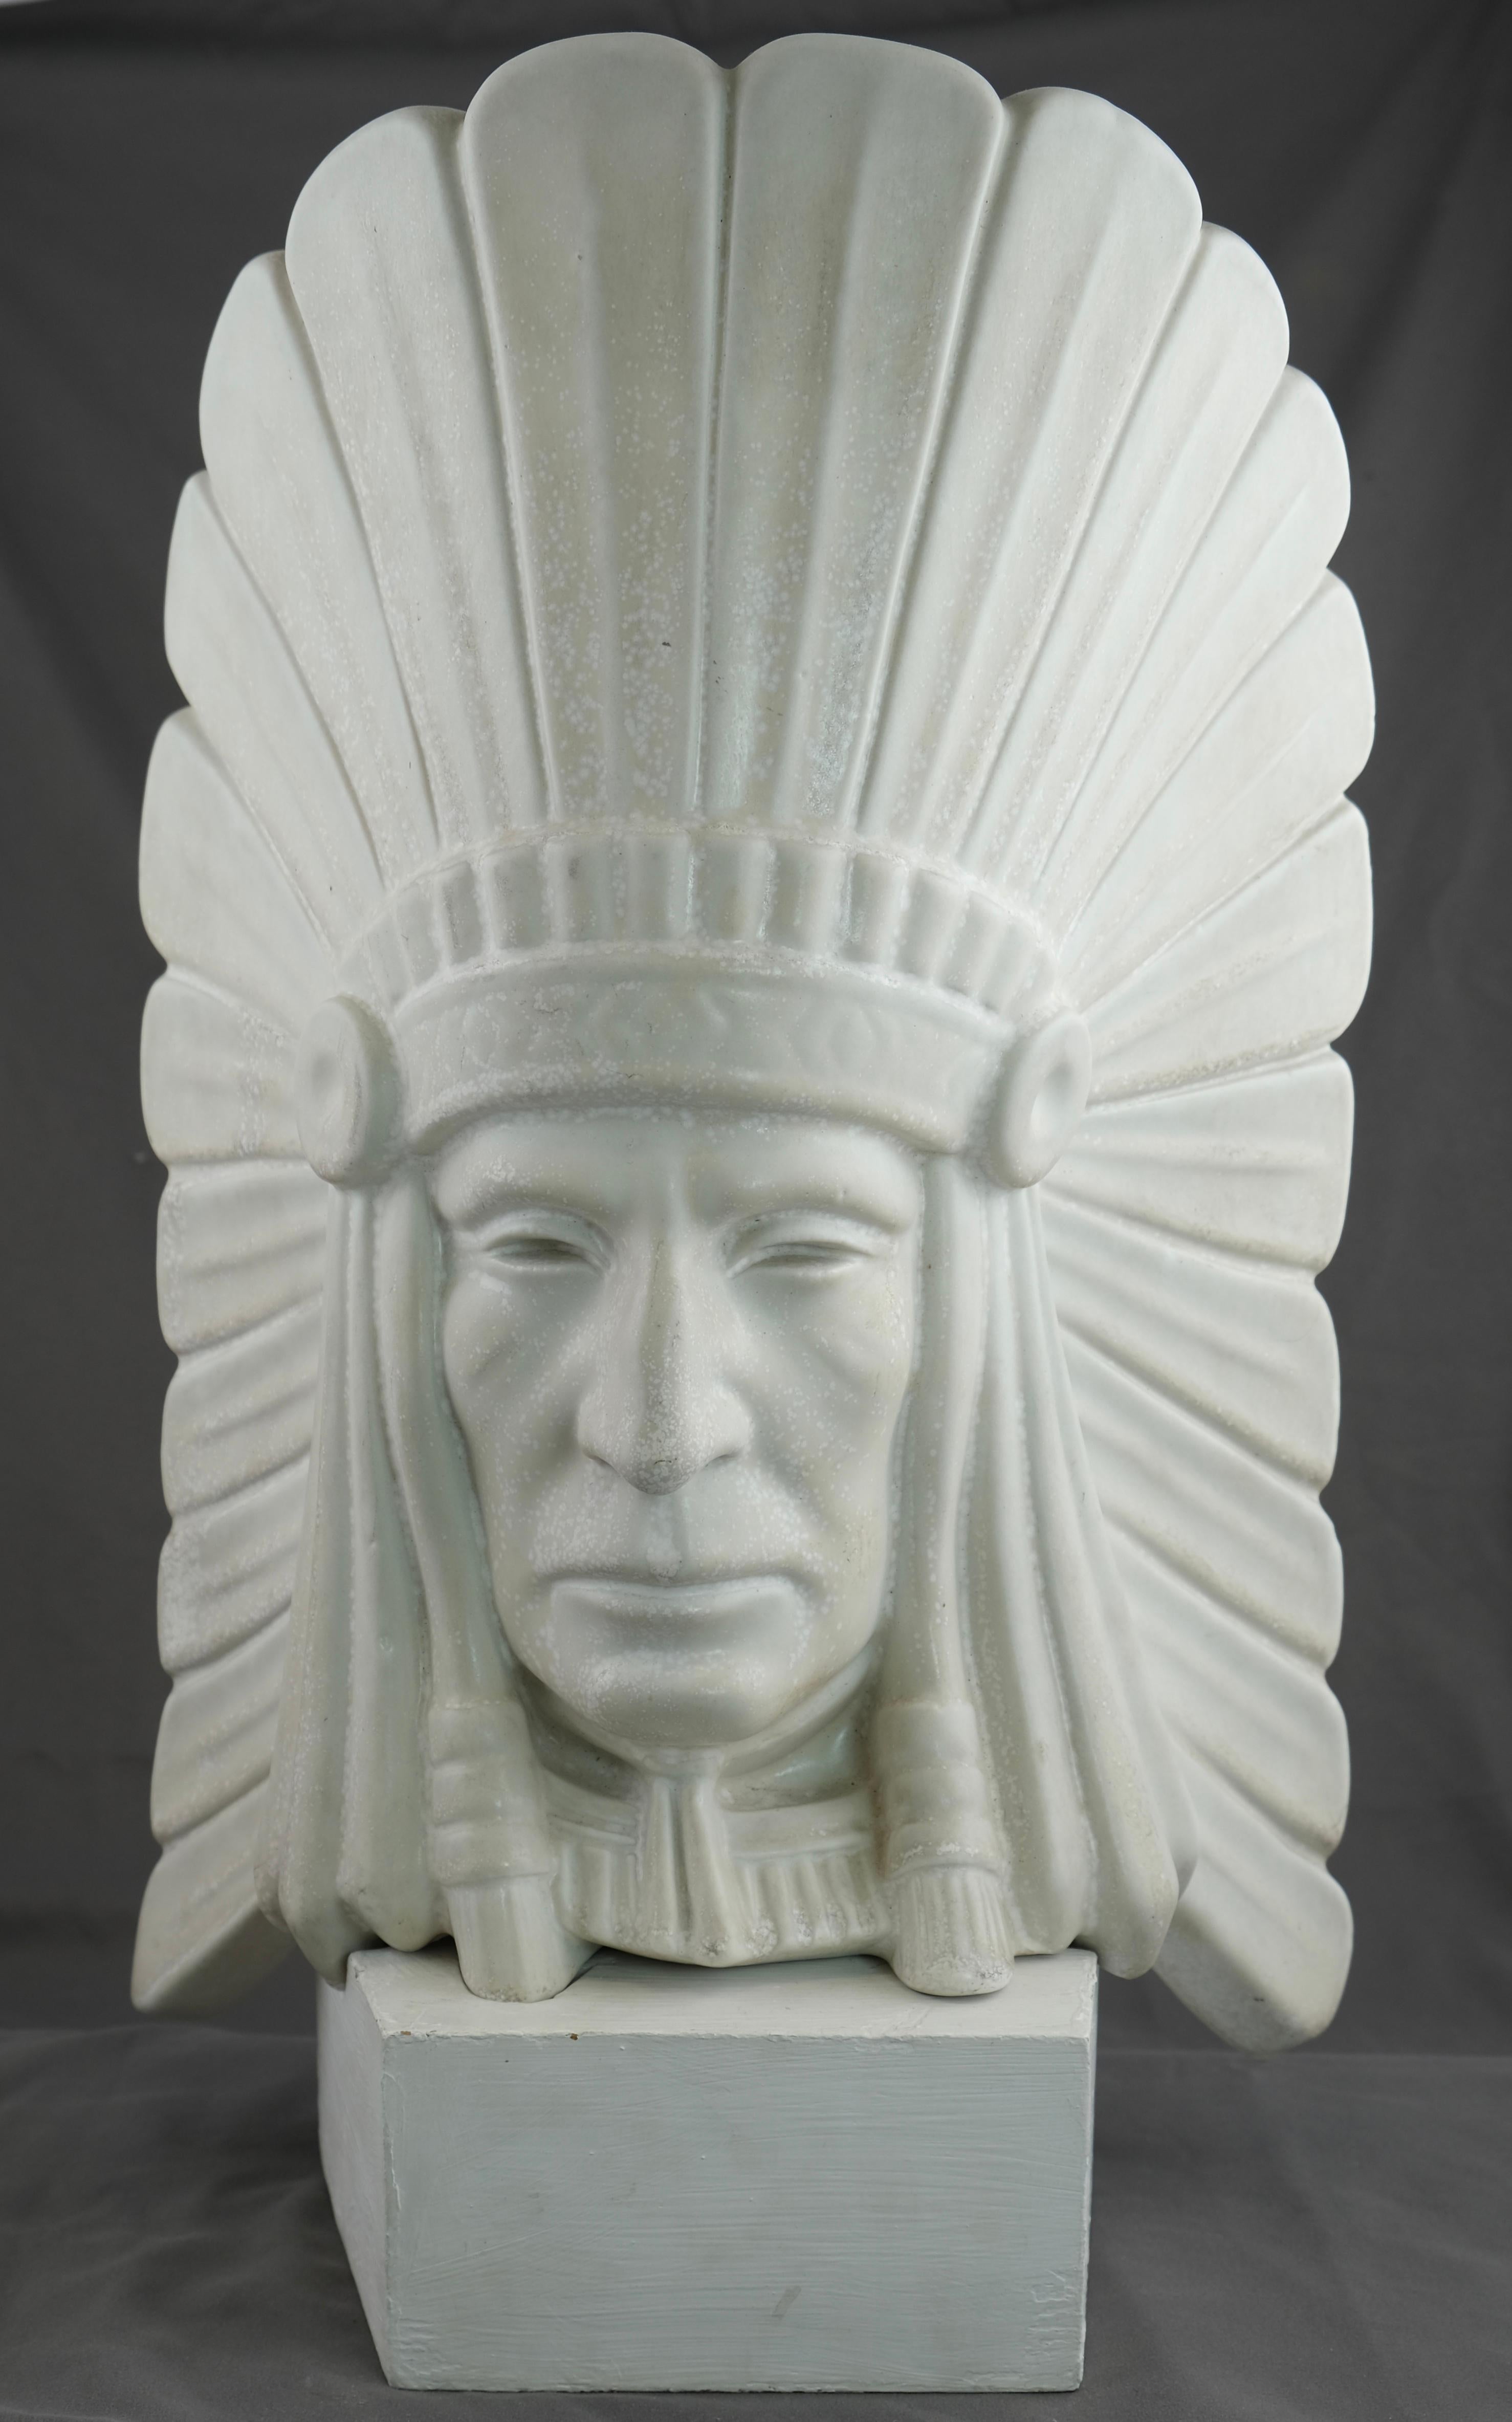 A sculptured head of an American Indian Chief. It is said that this really is a self-portrait of Gunnar Nylund, the artist.
 It has its original wooden stand . The height is 42 cm without the stand and 46.5 cm with the stand. 
The sculpture is